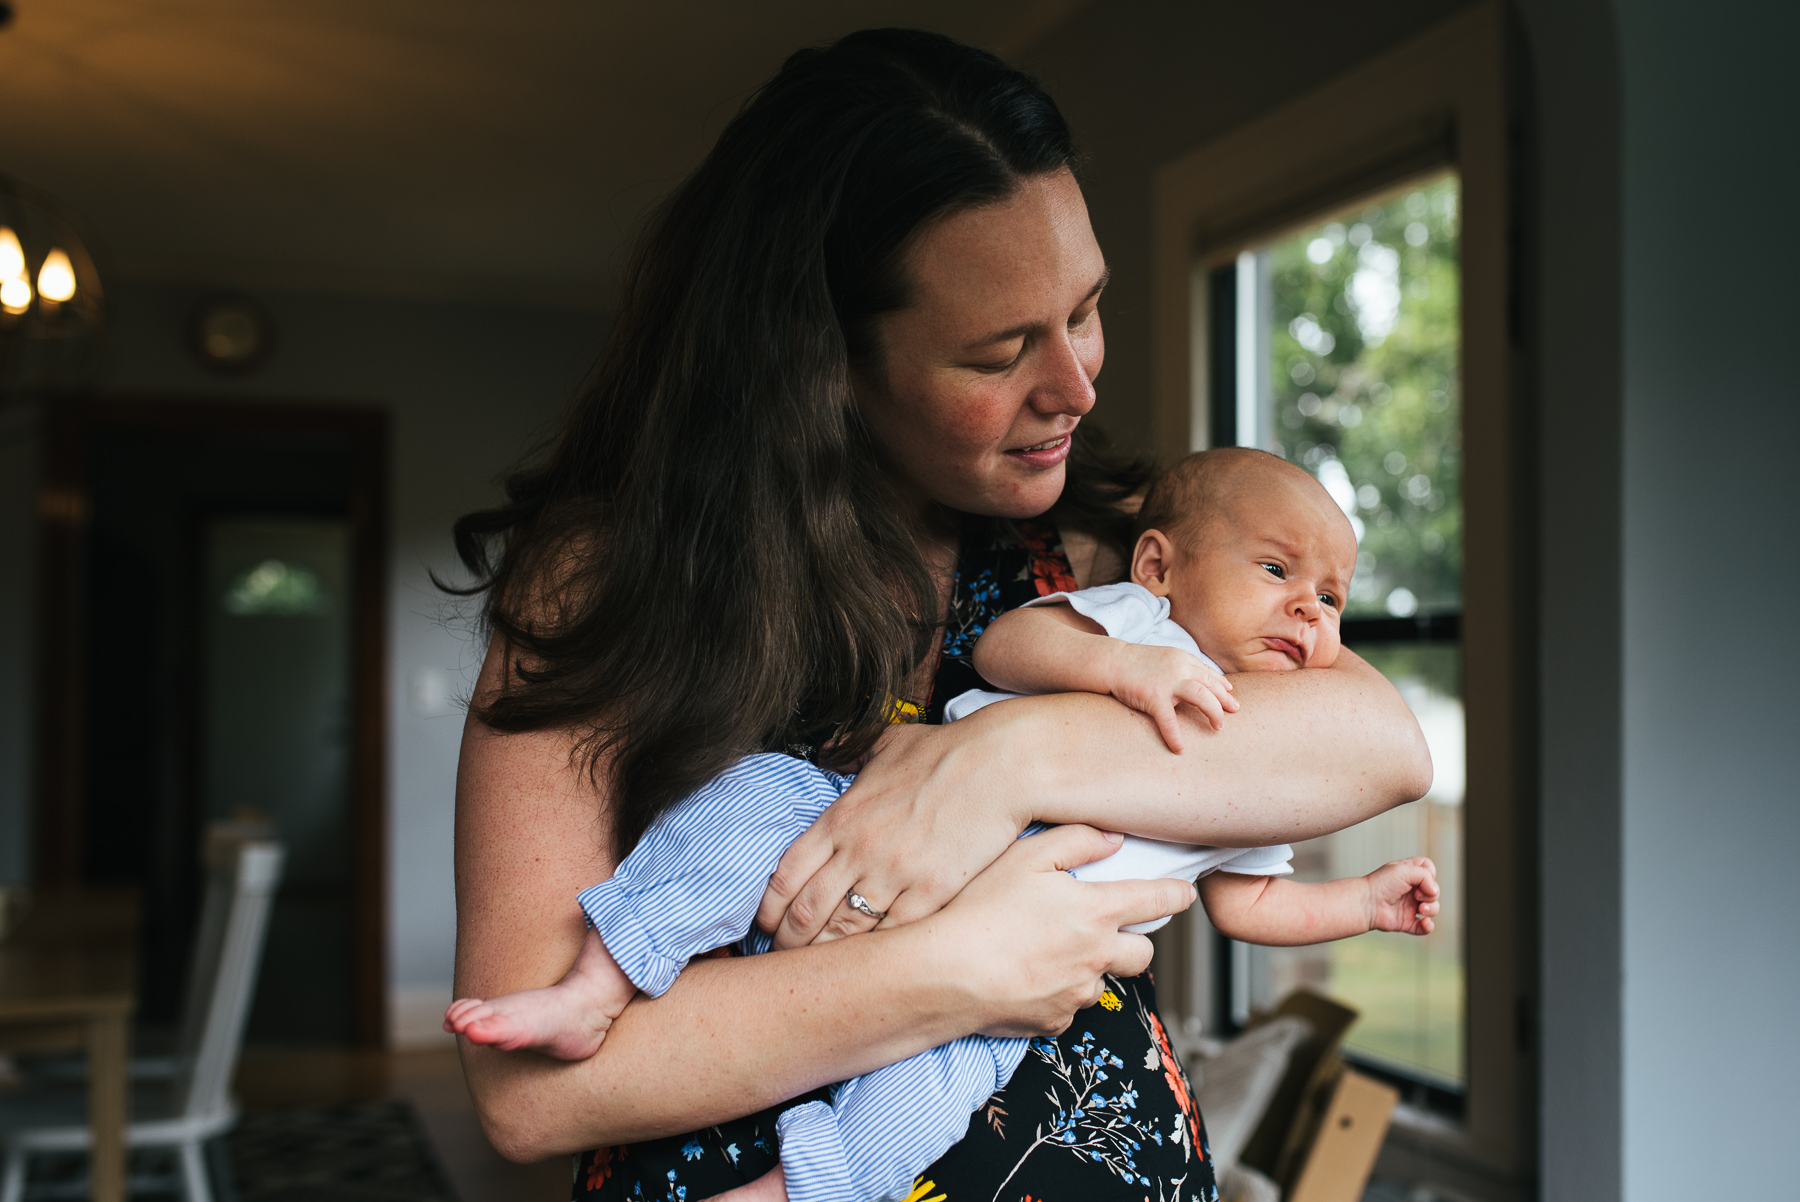 mom holding newborn son in dining room while he is upset